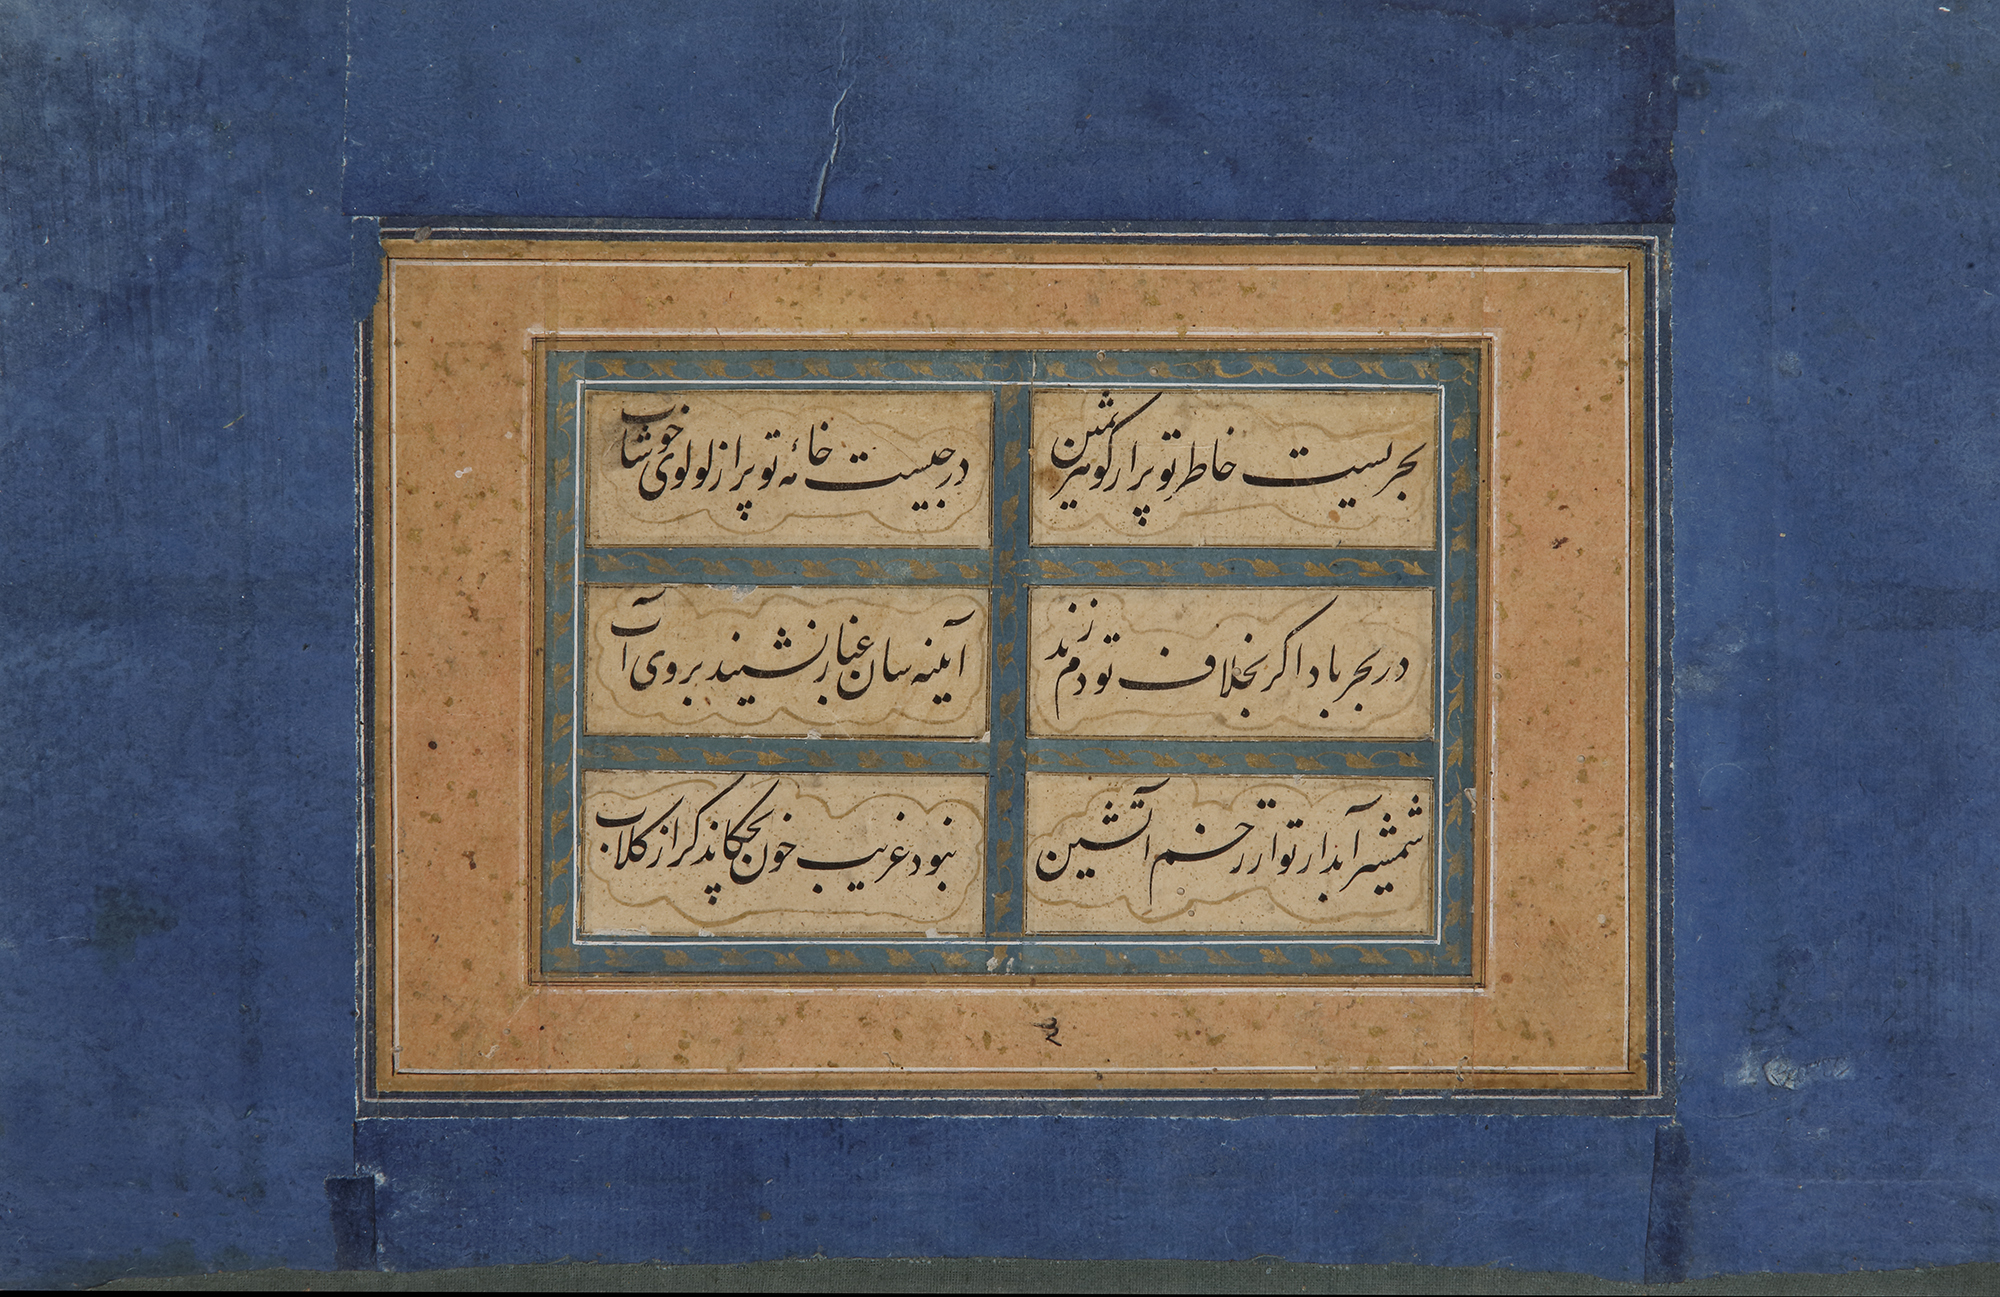 AN OTTOMAN CALLIGRAPHY PAGE FROM A MURAQQA ALBUM, TURKEY, 18TH CENTURY - Image 3 of 4